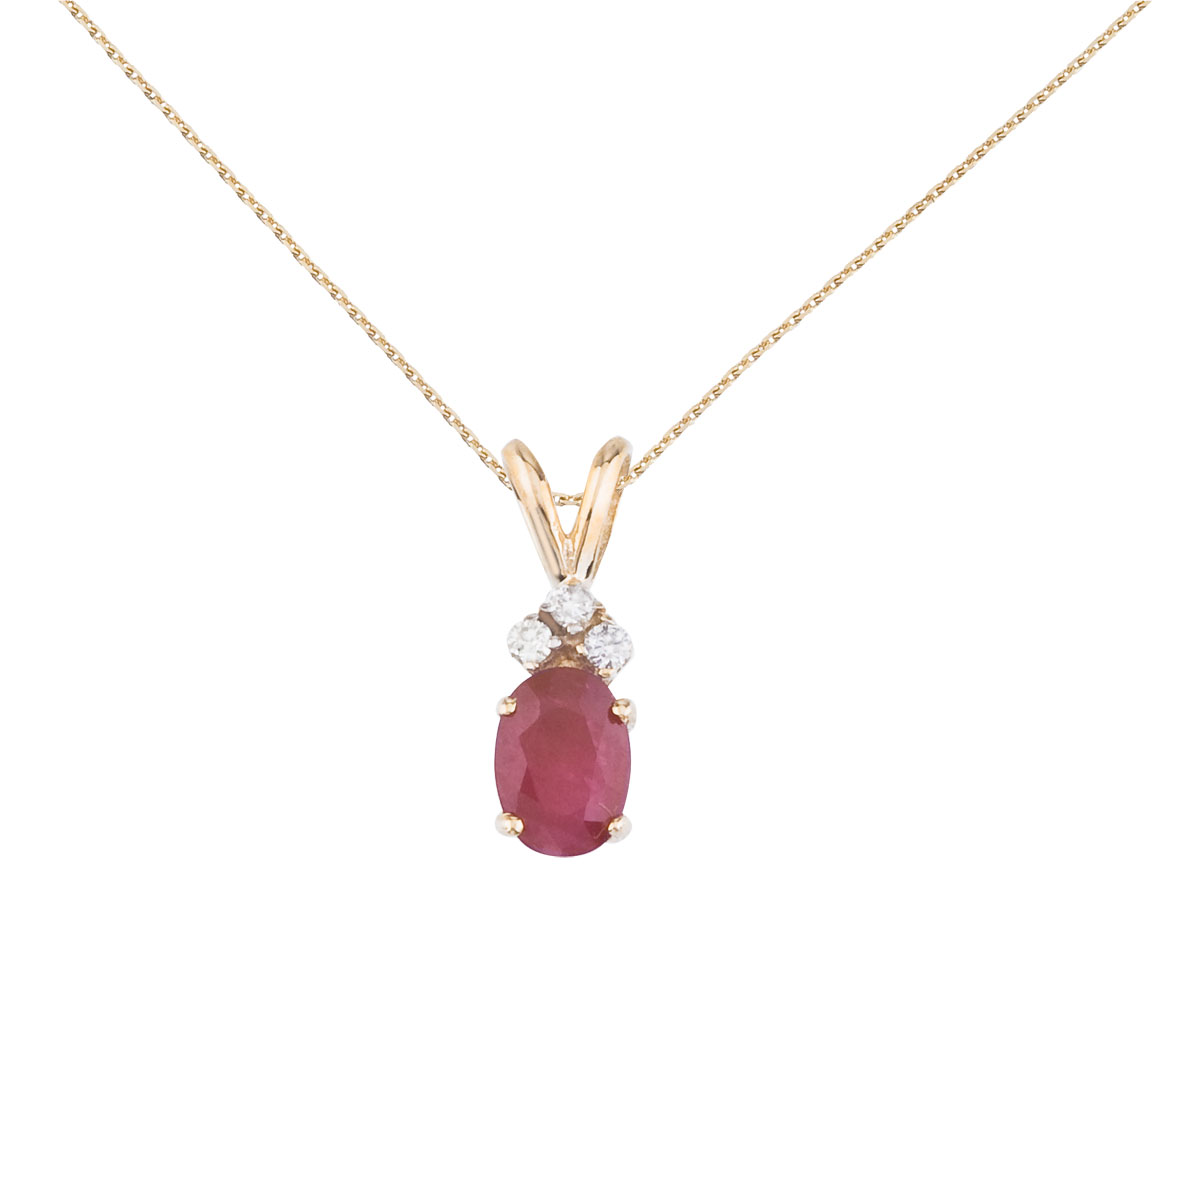 JCX2694: 7x5 mm oval natural ruby pendant topped with 3 bright diamonds set in 14k yellow gold.